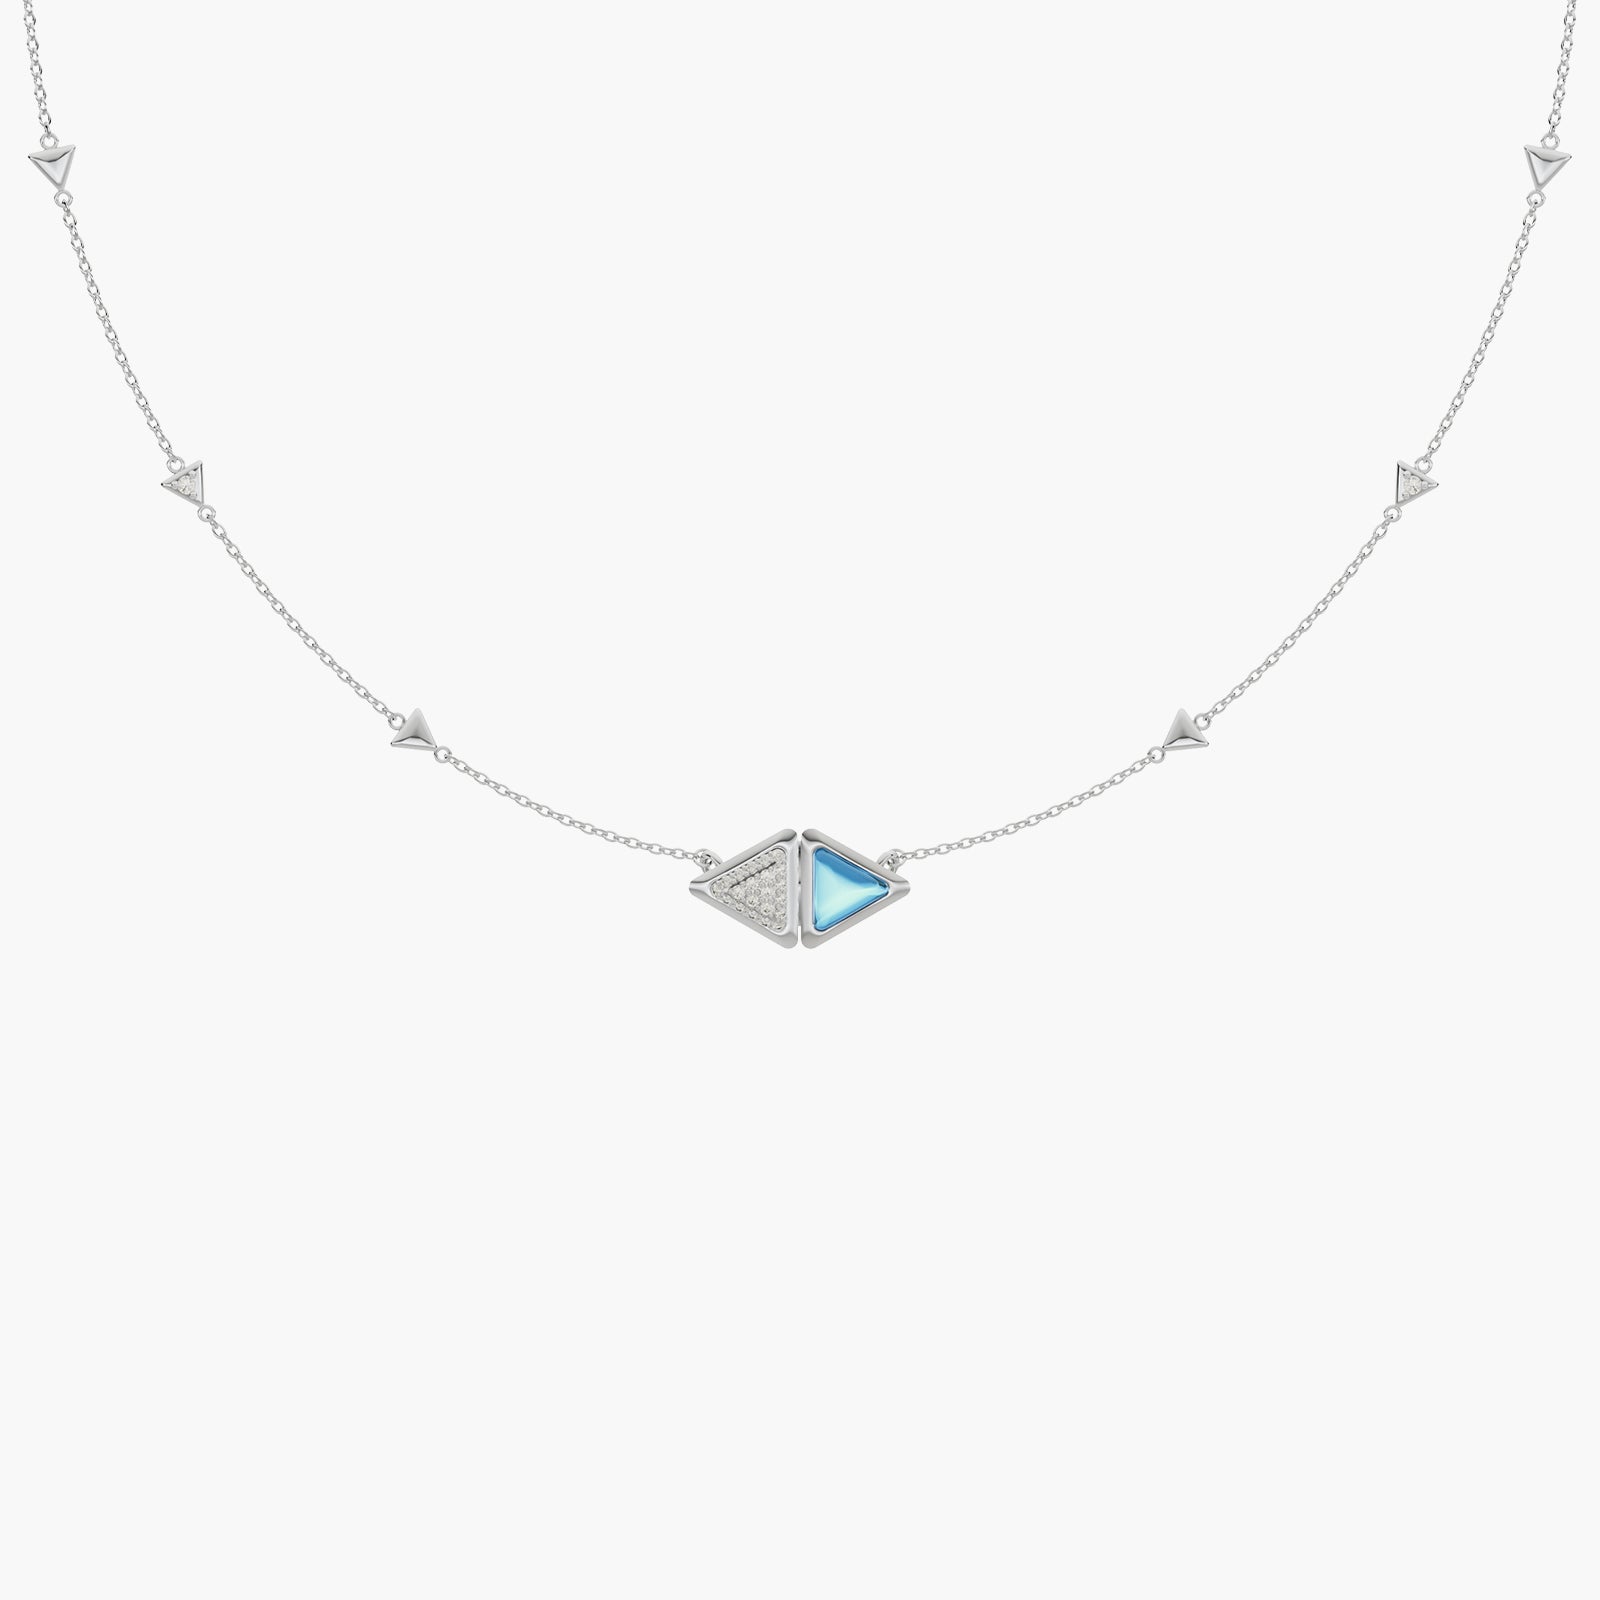 Necklace Mirror Exquisite White Gold Blue Topaz and Diamonds